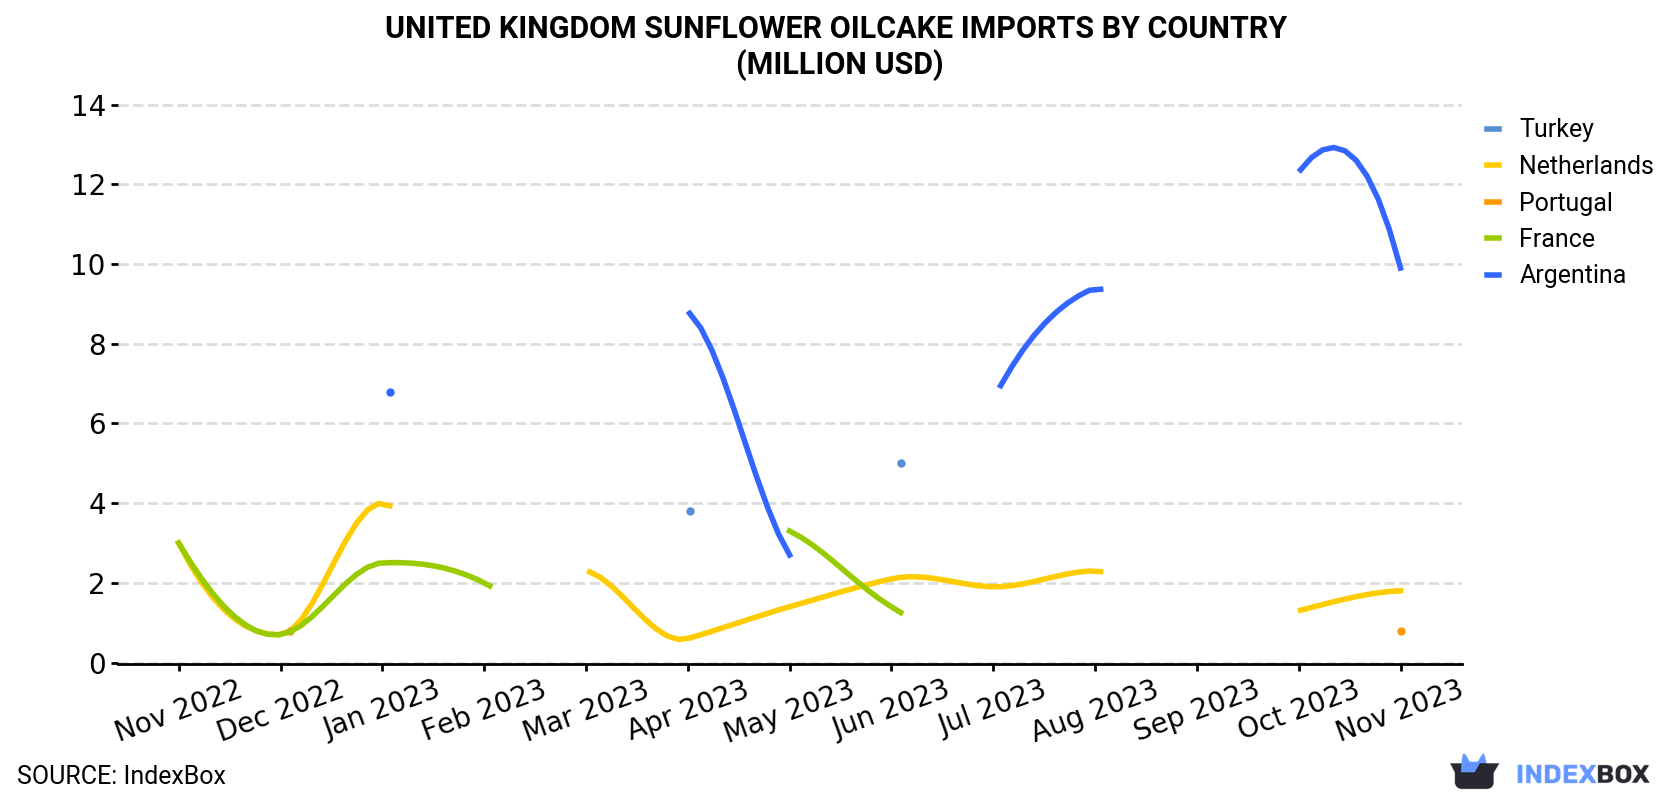 United Kingdom Sunflower Oilcake Imports By Country (Million USD)